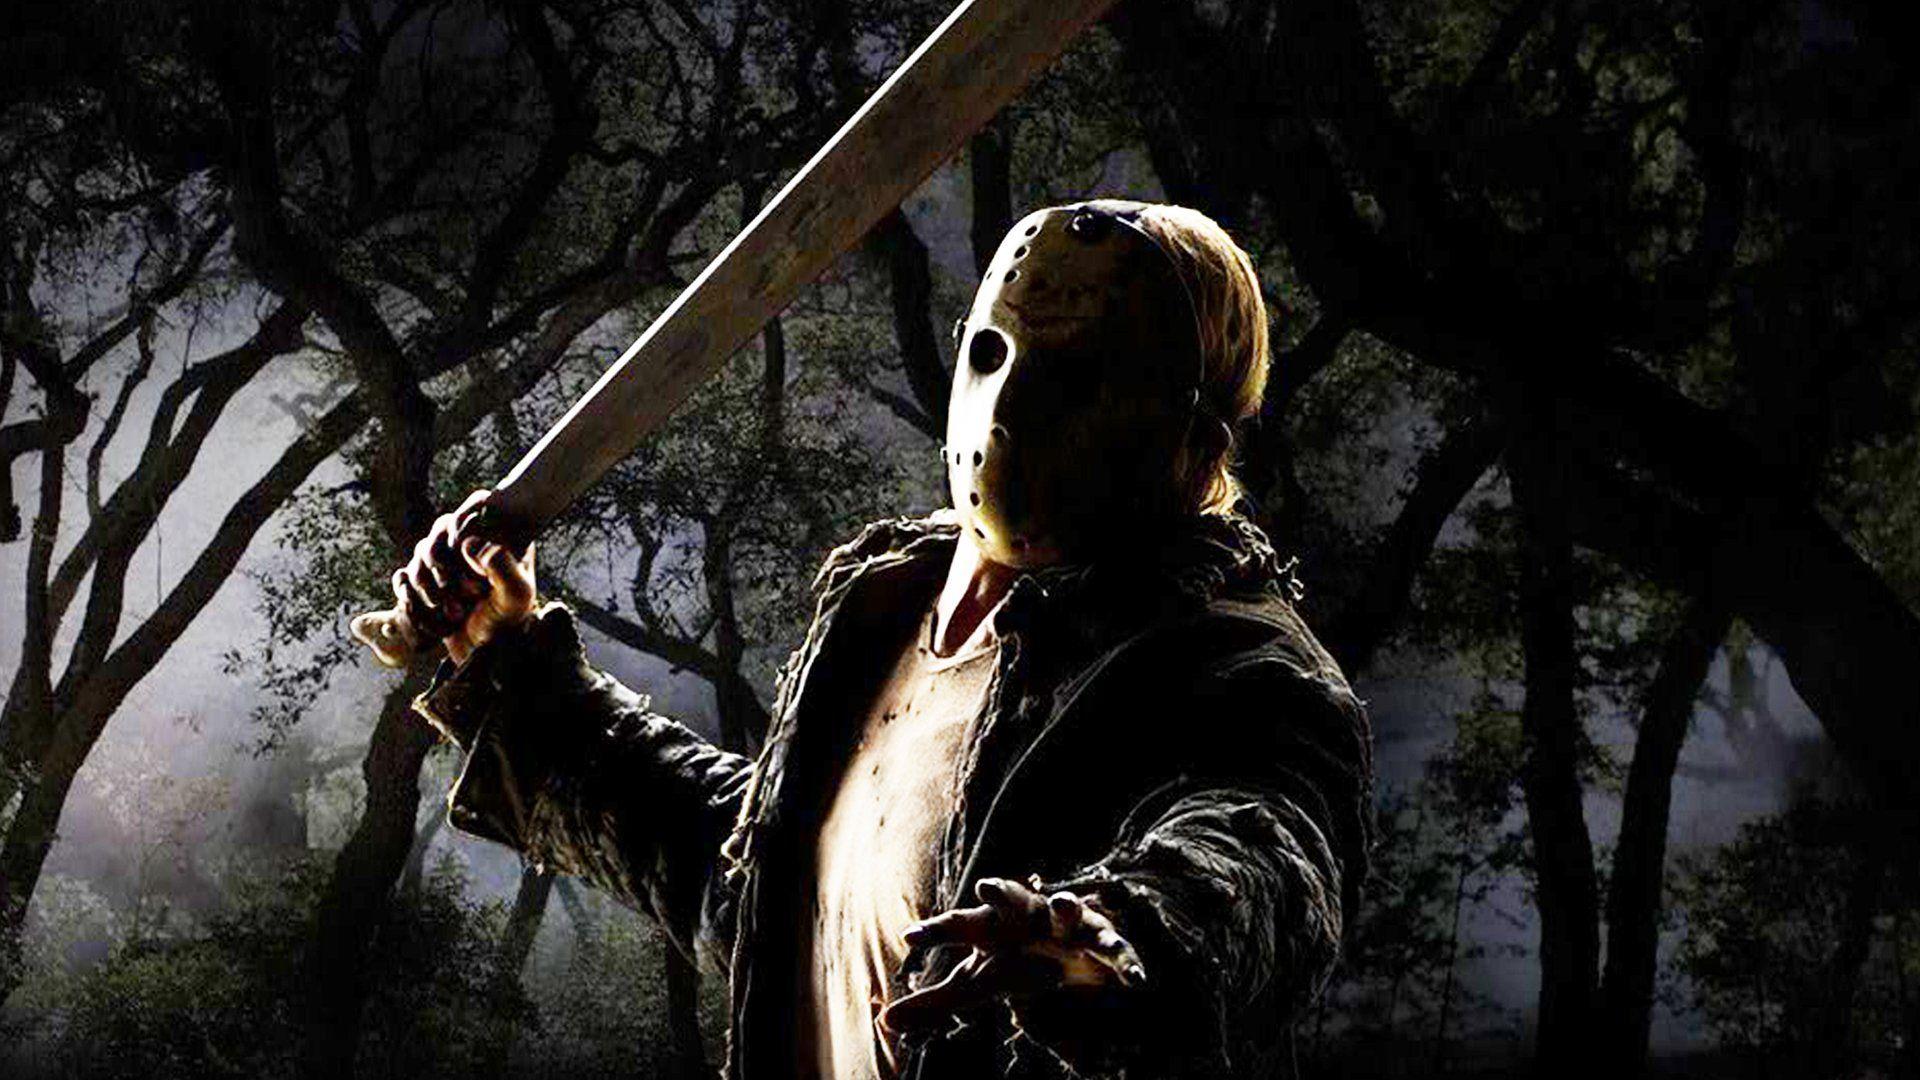 Download jason voorhees wallpaper to your cell phone th axe